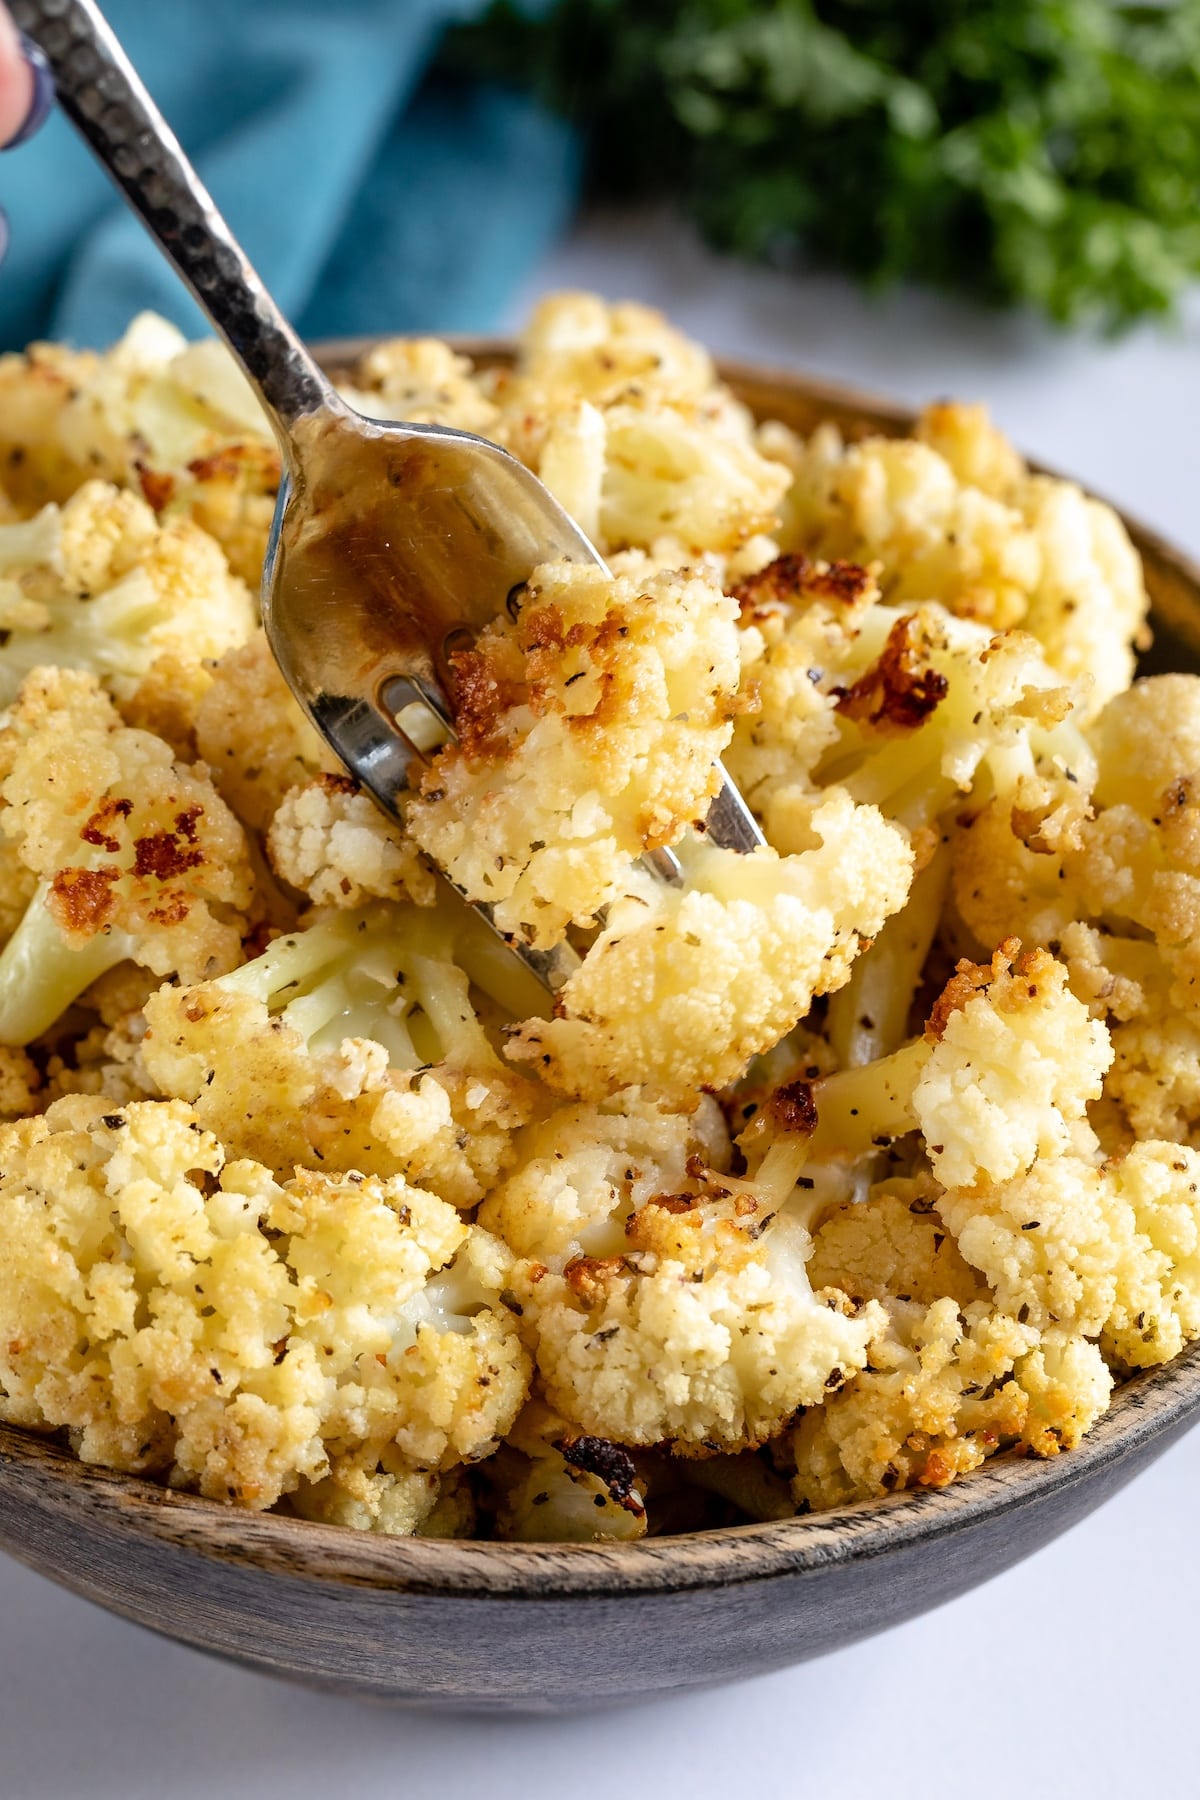 cauliflower in a wood bowl with a fork picking up some pieces.